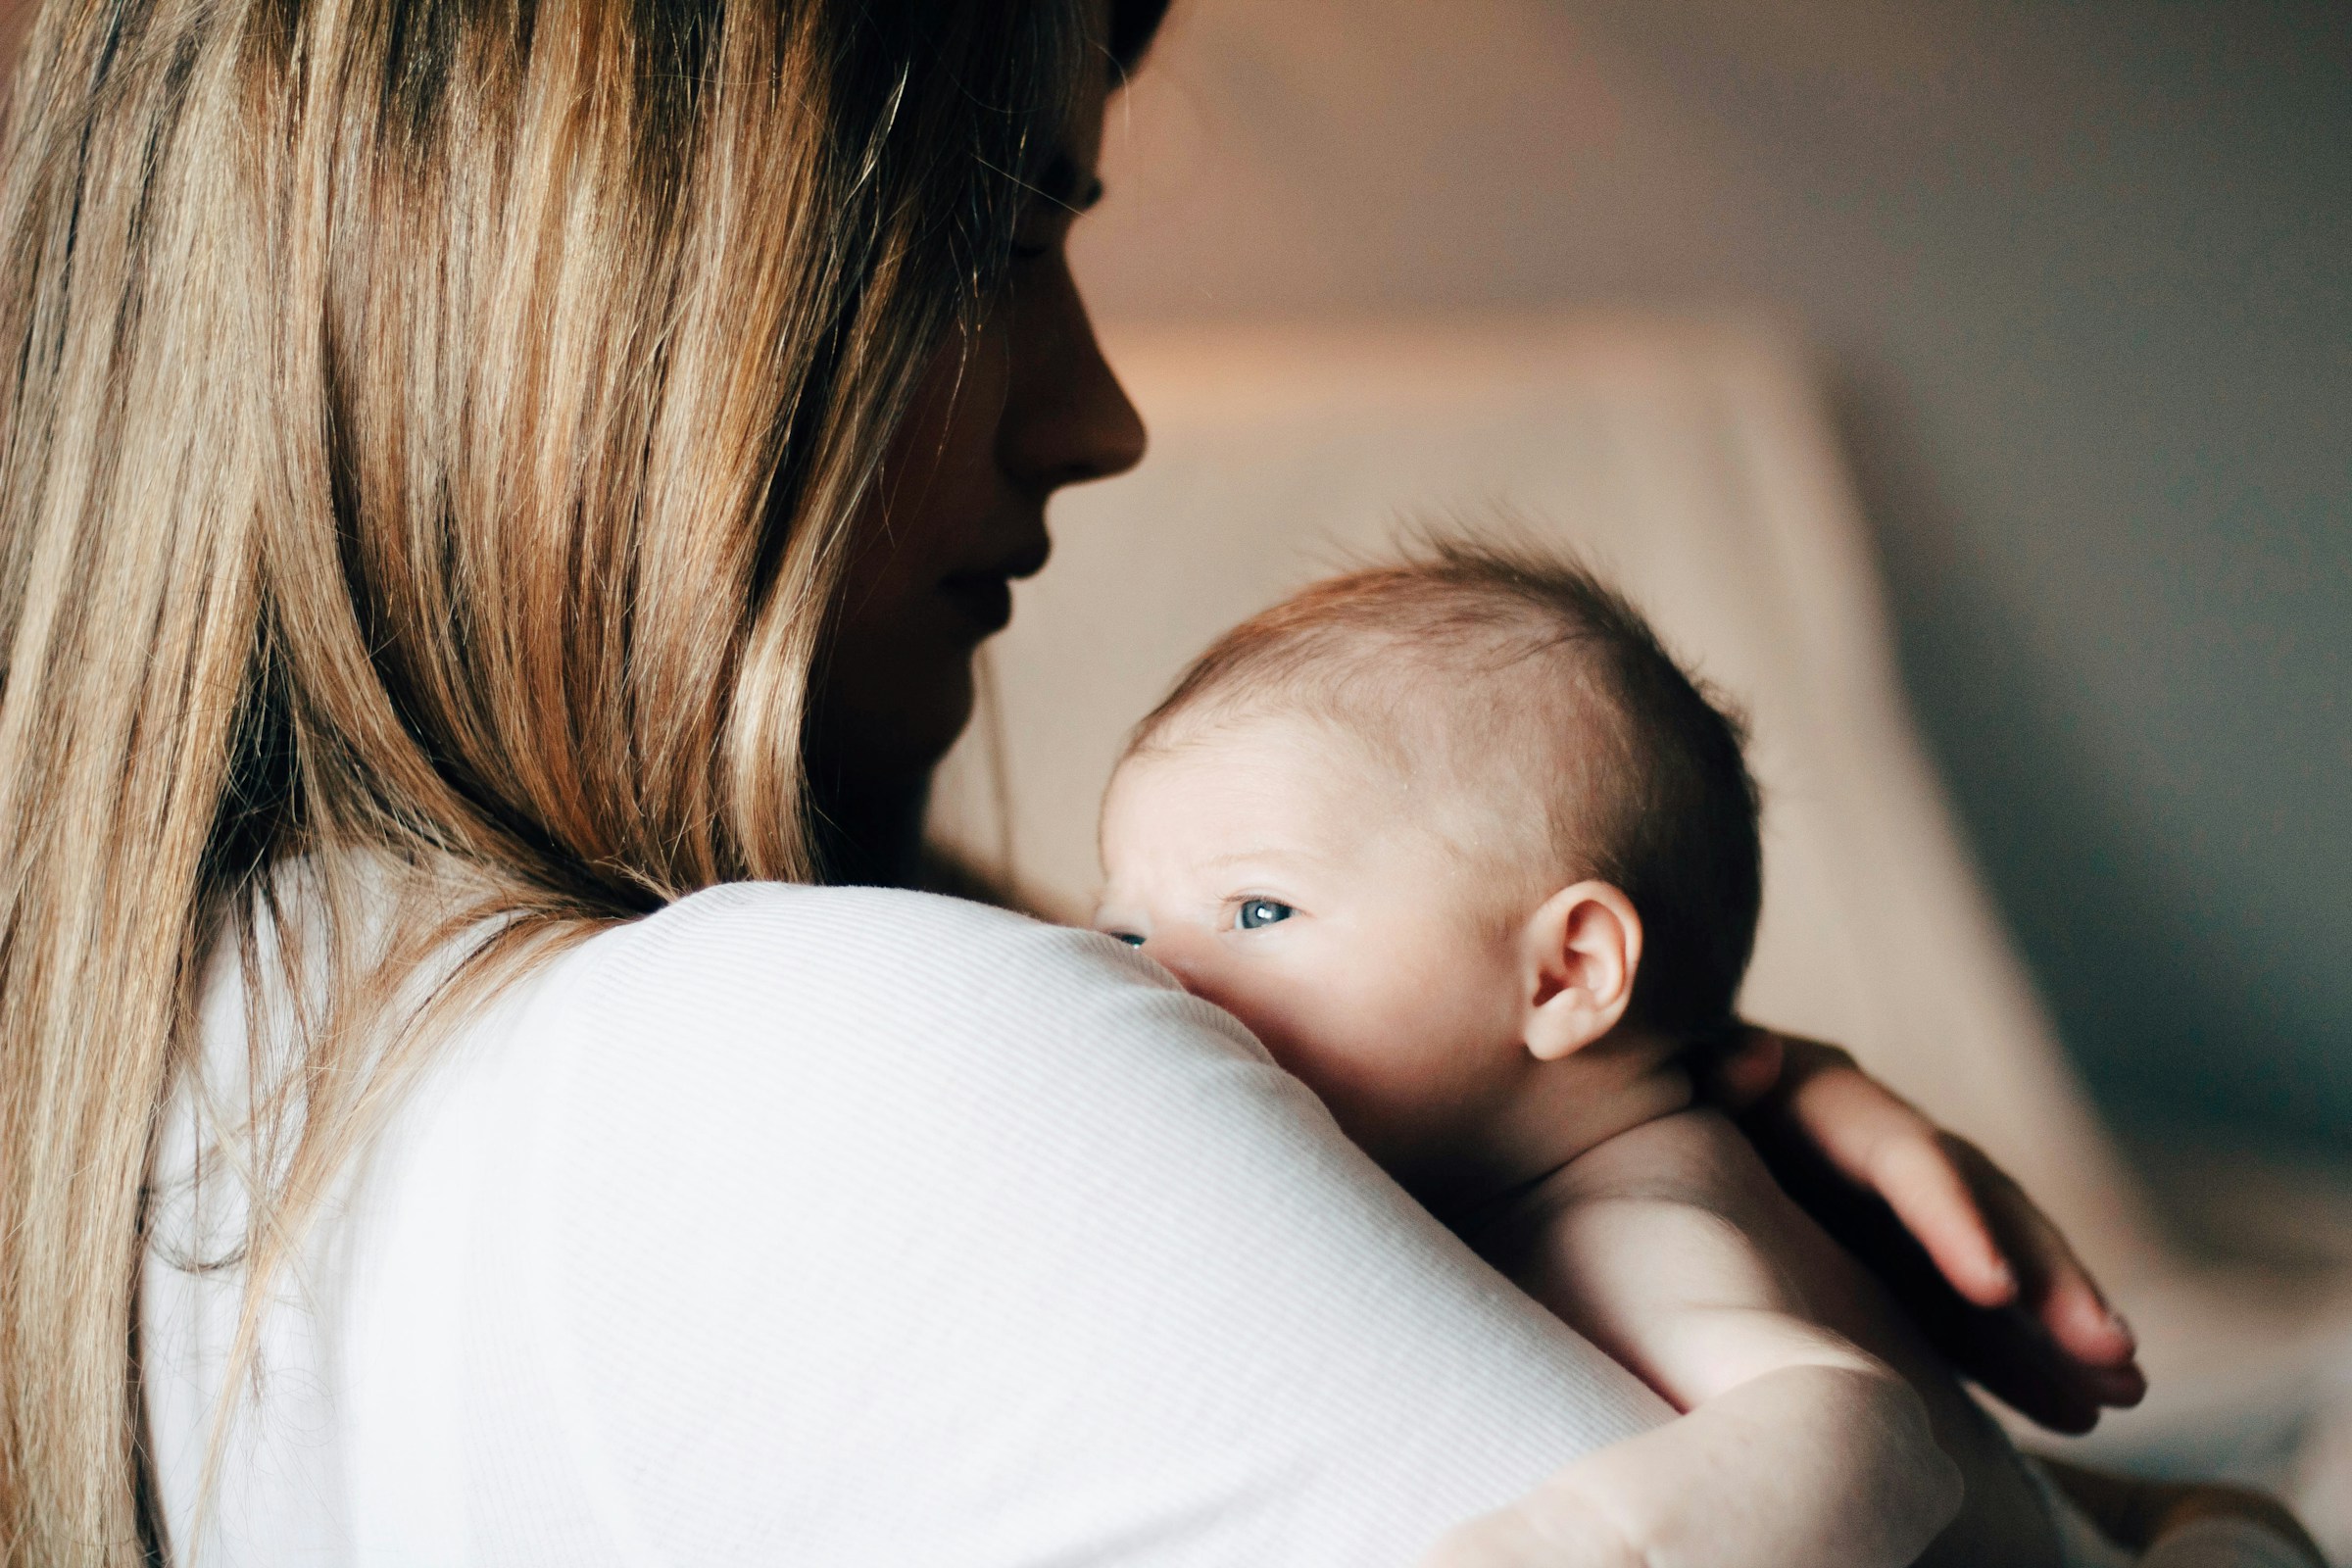 A mother holding her baby | Source: Unsplash